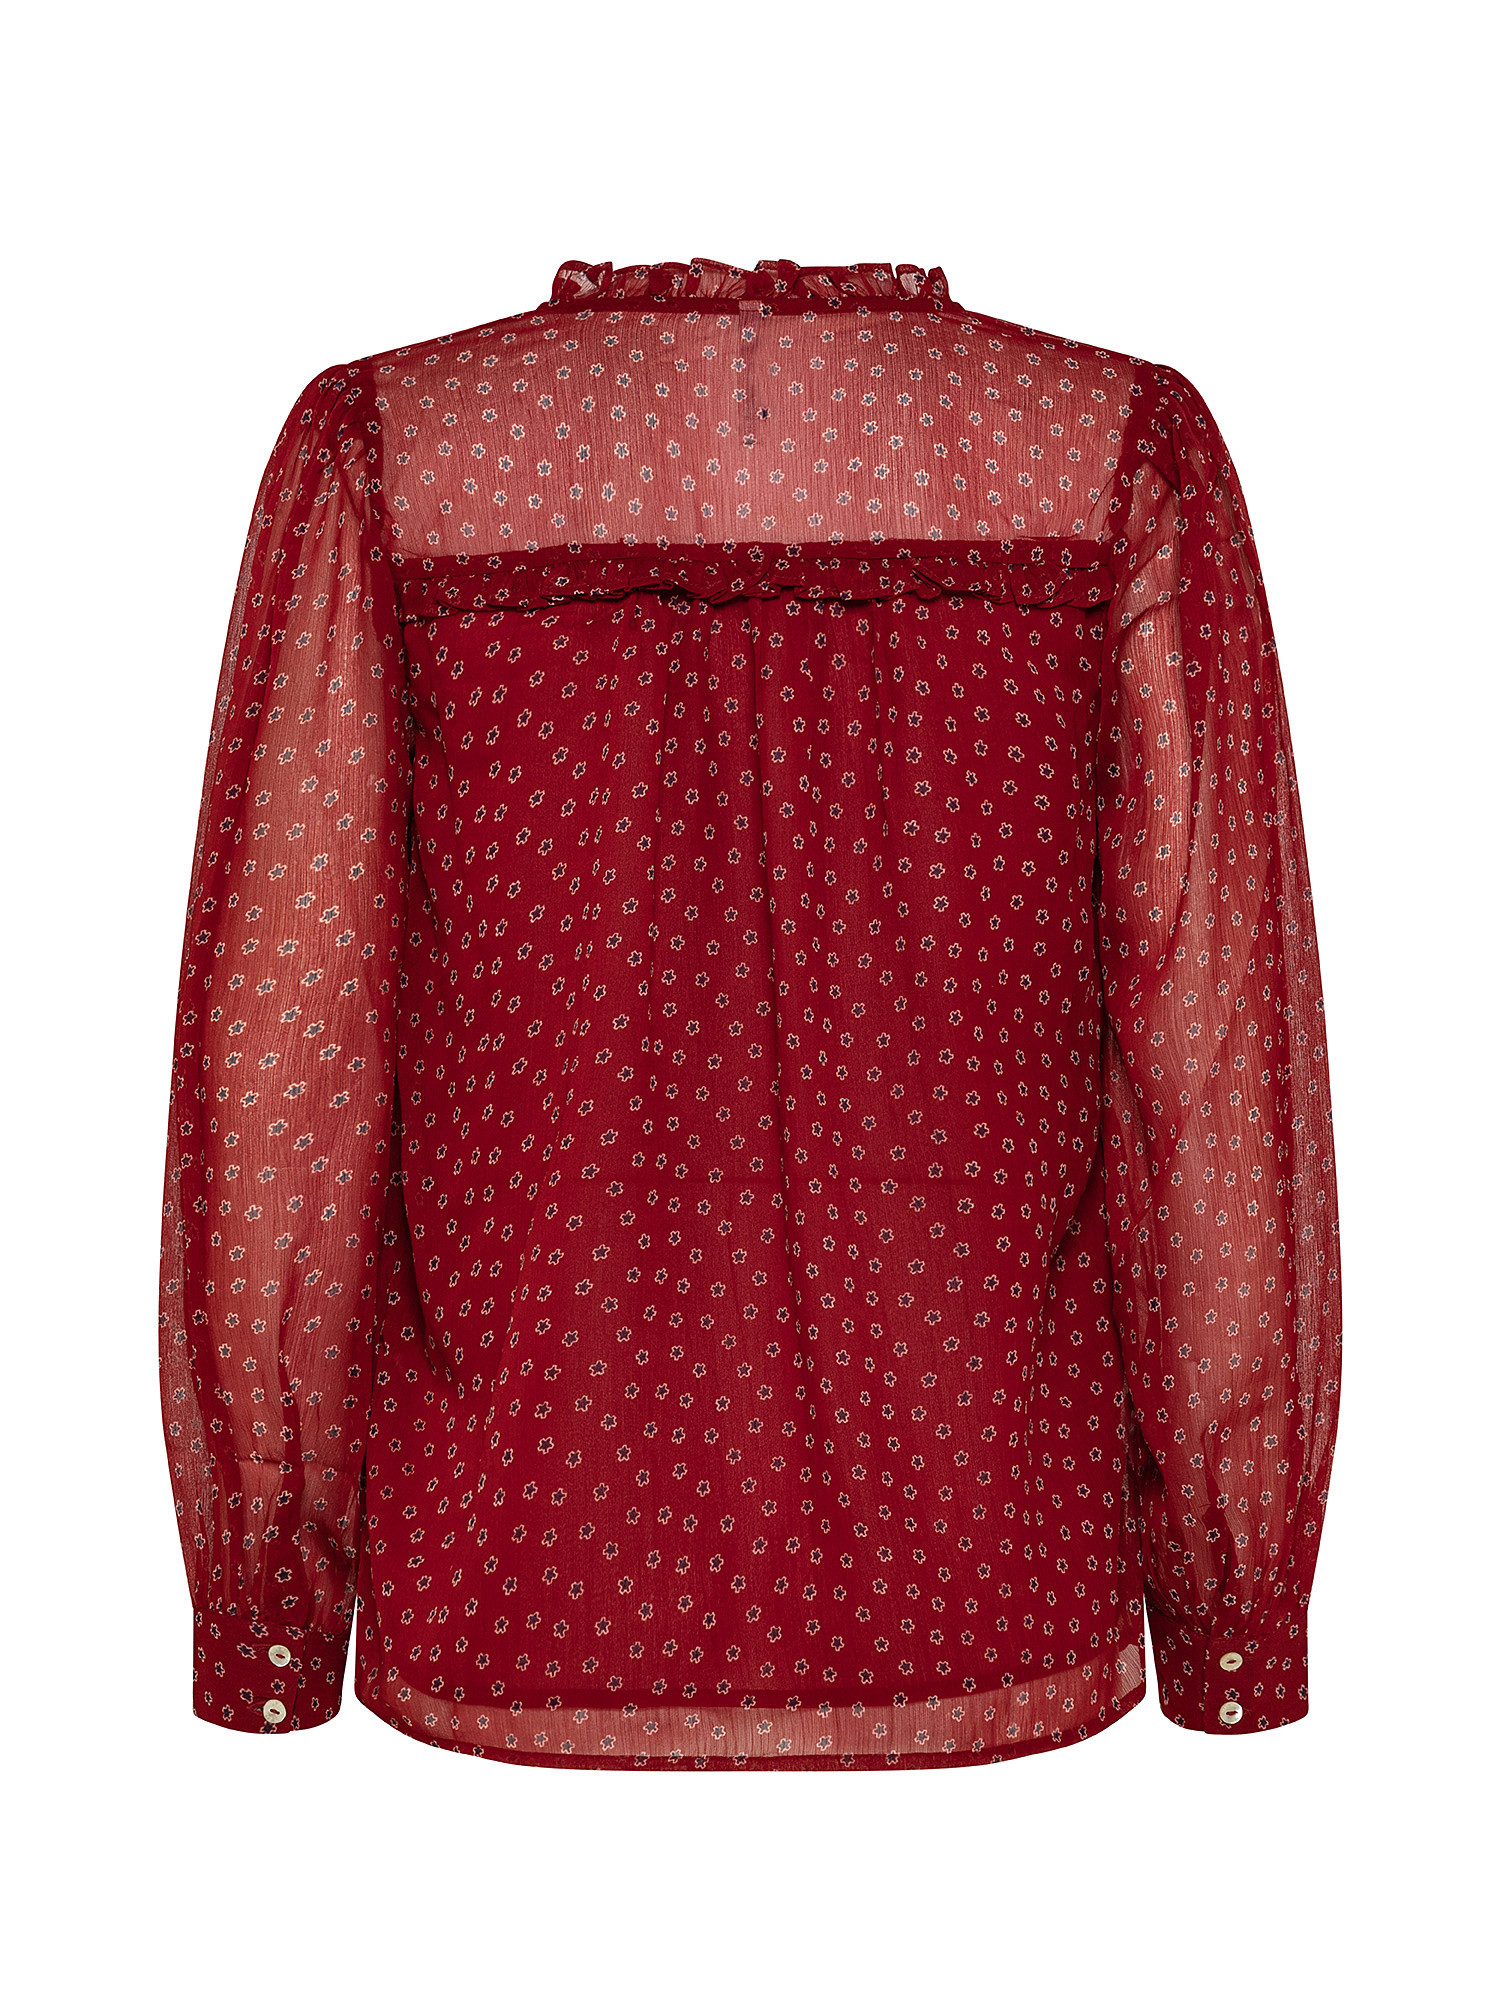 Nala blouse with floral print, Red, large image number 1